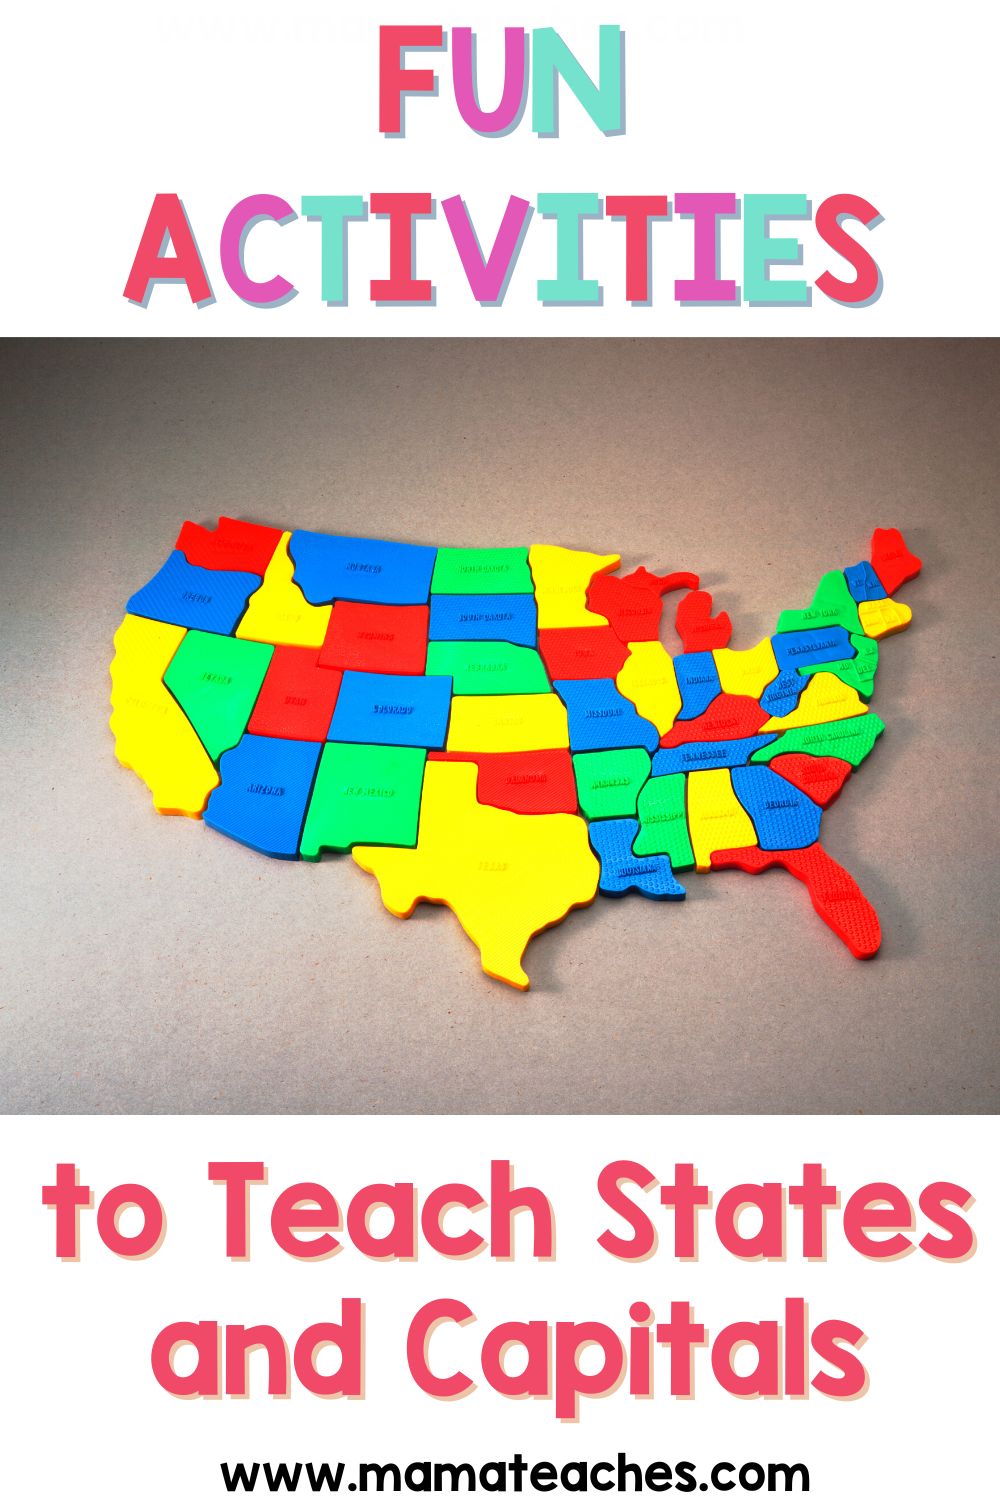 Fun Activities to Teach States and Capitals